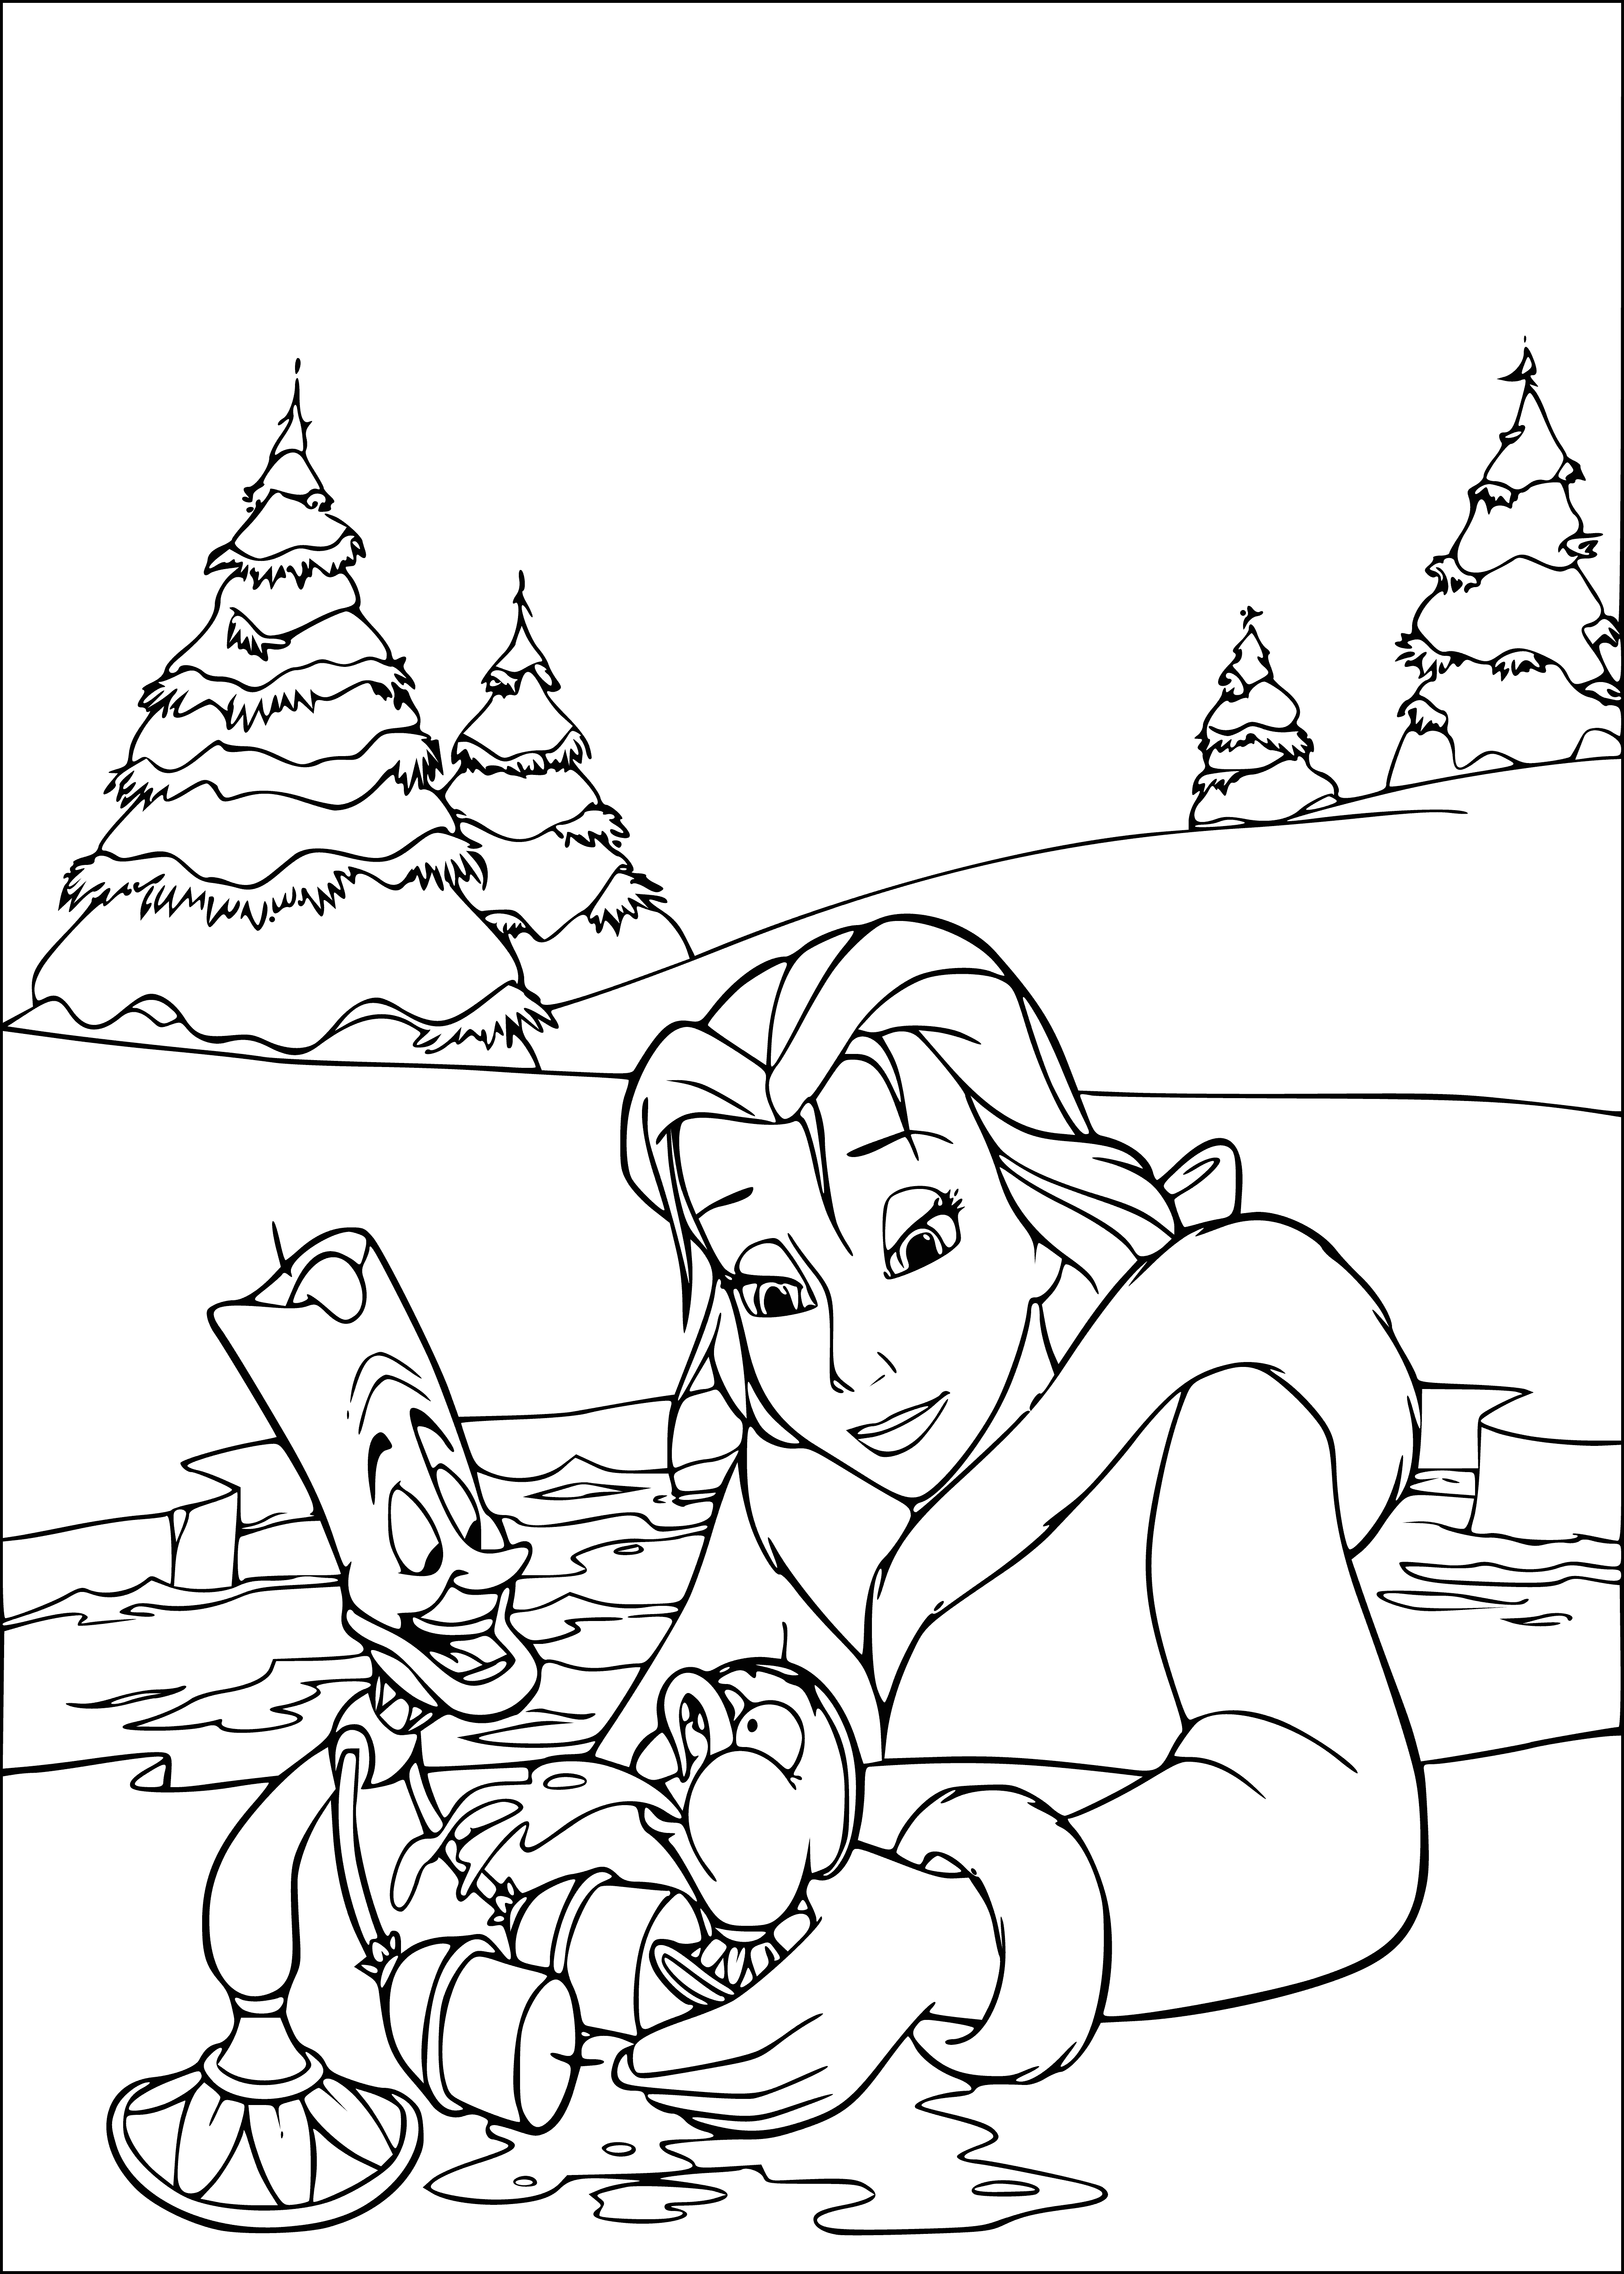 Ice Hole Rescue coloring page